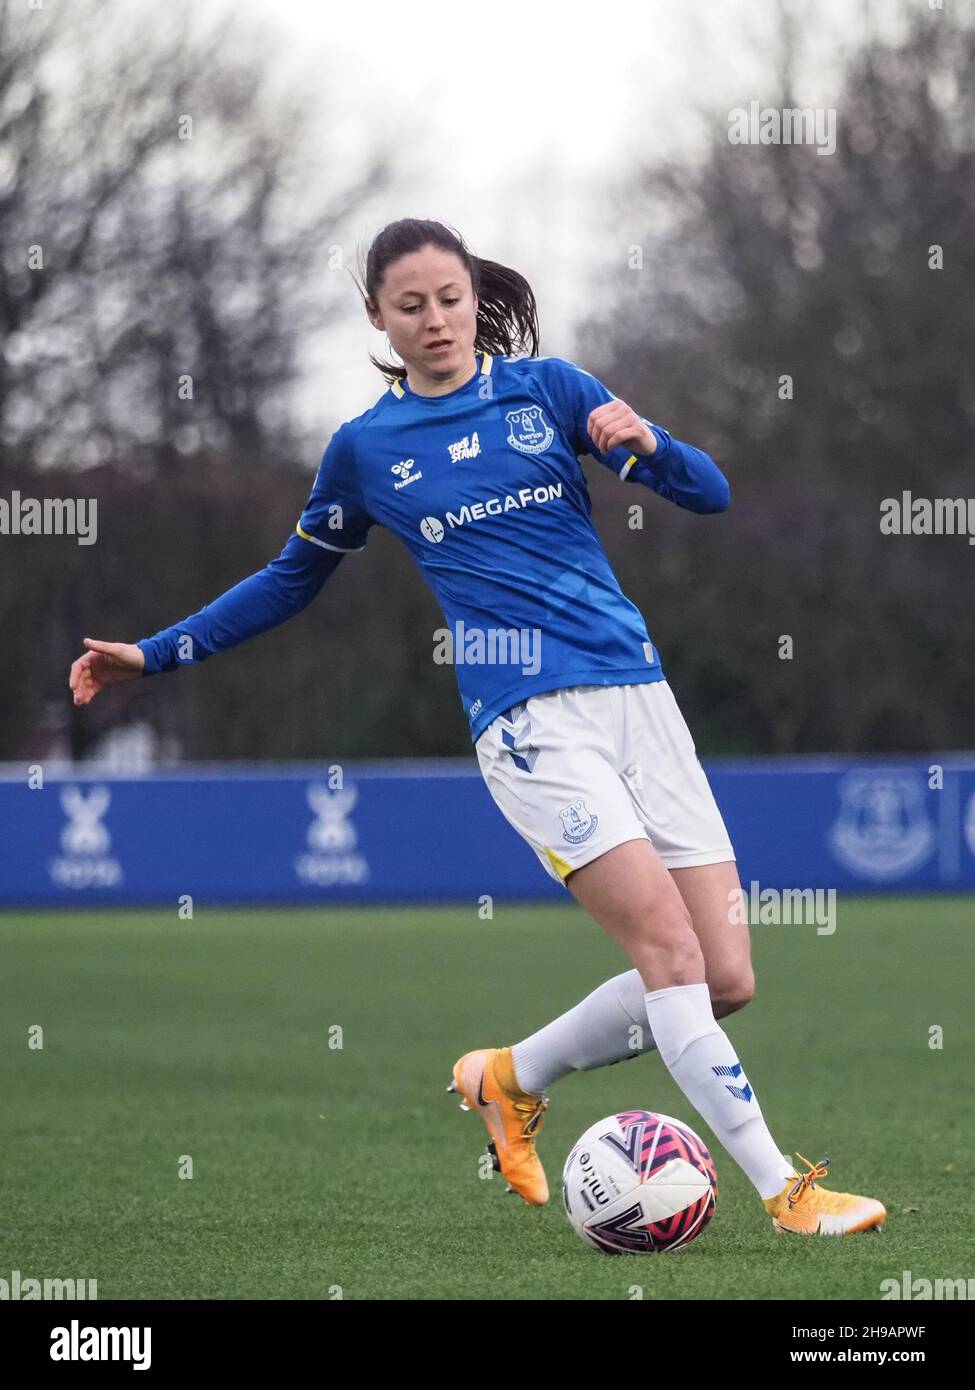 Liverpool, UK. 05th Dec, 2021. Liverpool, England, December 5th Danielle Turner (3 Everton) on the ball during the FA Womens Continental League Cup game between Everton and Durham at Walton Hall Park in Liverpool, England Natalie Mincher/SPP Credit: SPP Sport Press Photo. /Alamy Live News Stock Photo